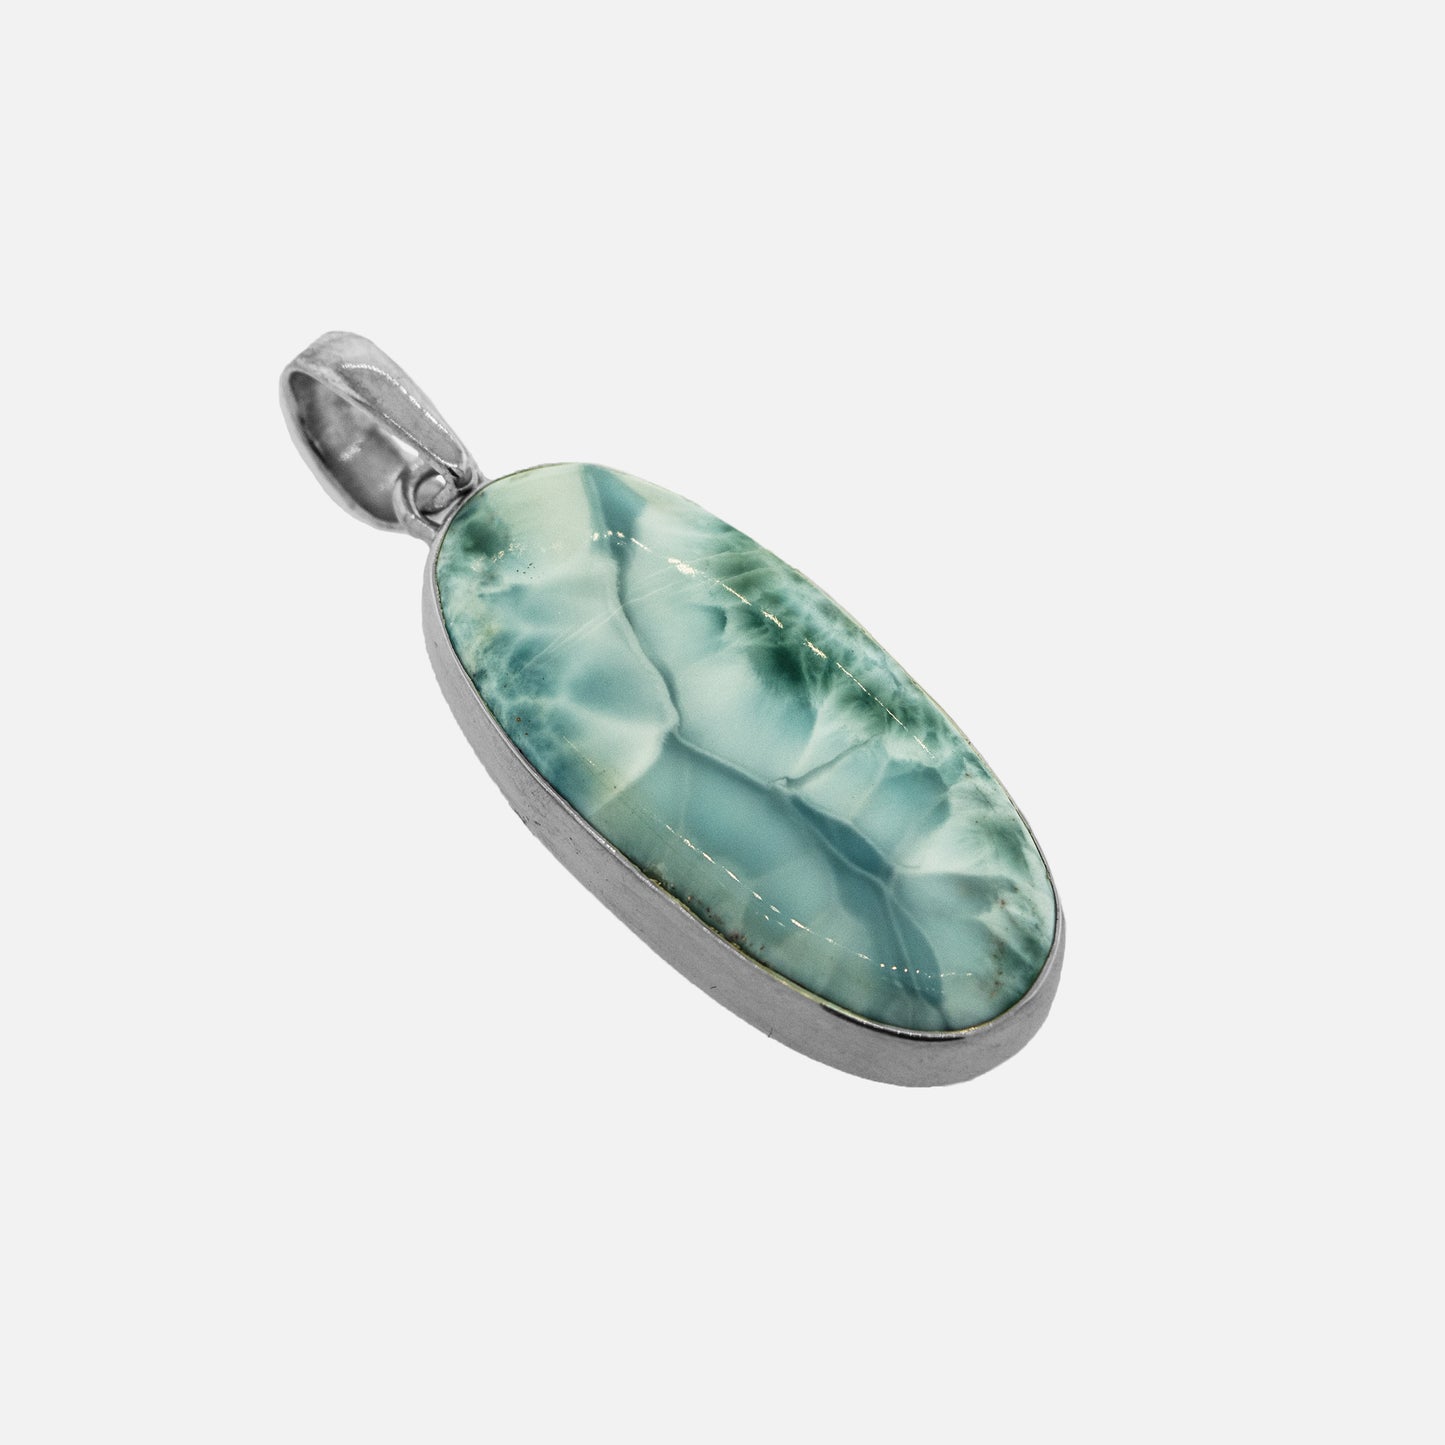 A Beautiful Long Oval Larimar Pendant made of .925 Sterling Silver with a green Larimar stone, sourced from the Dominican Republic, by Super Silver.